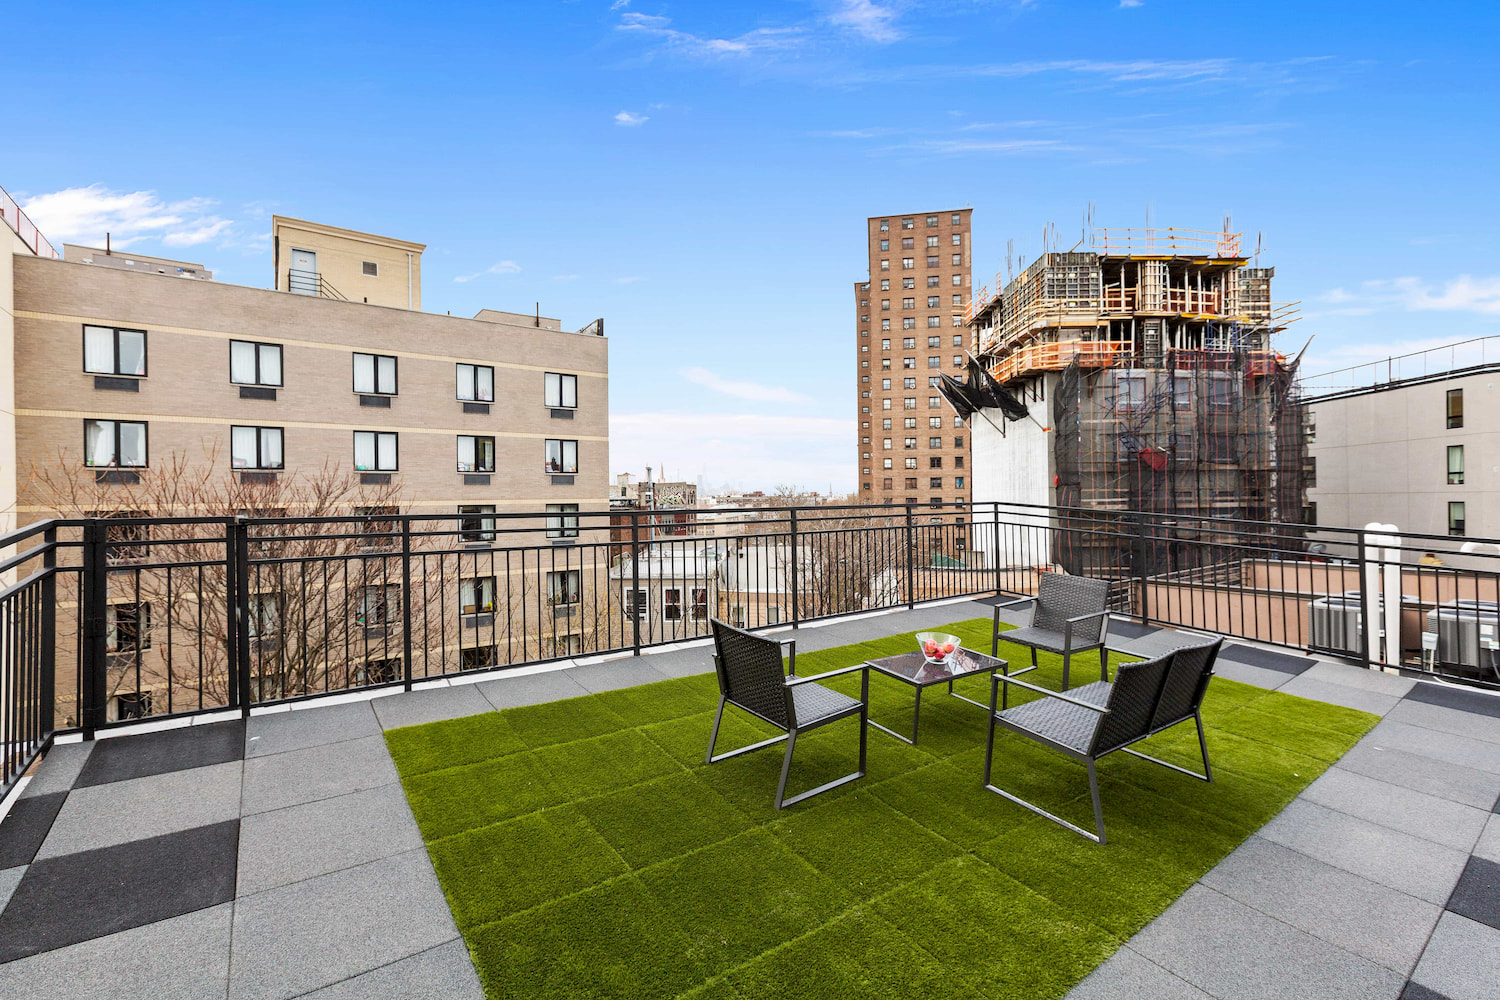 South Williamsburg House rooftop view